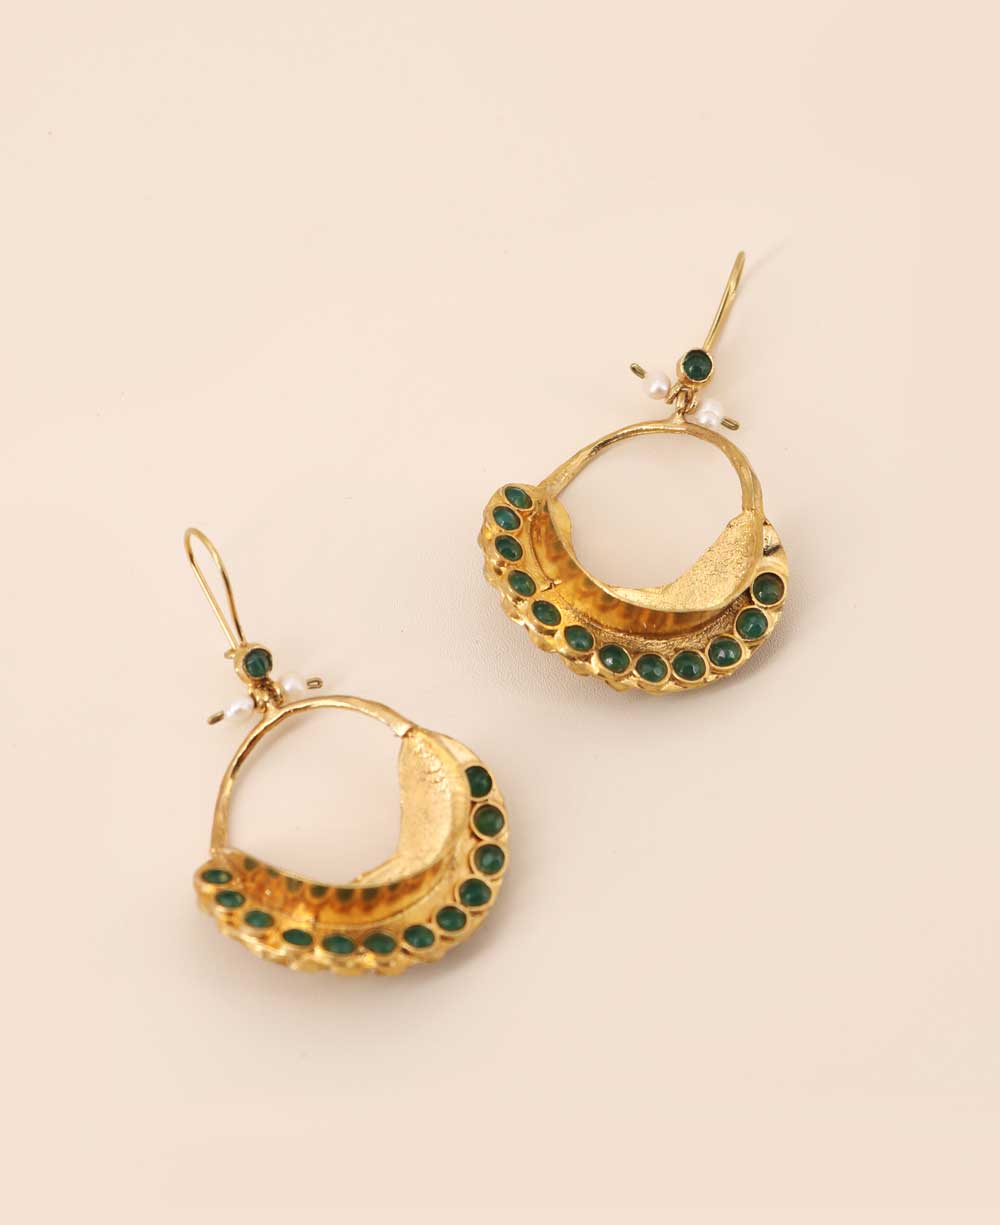 Turkish jewelry, gold plated brass earrings in green color